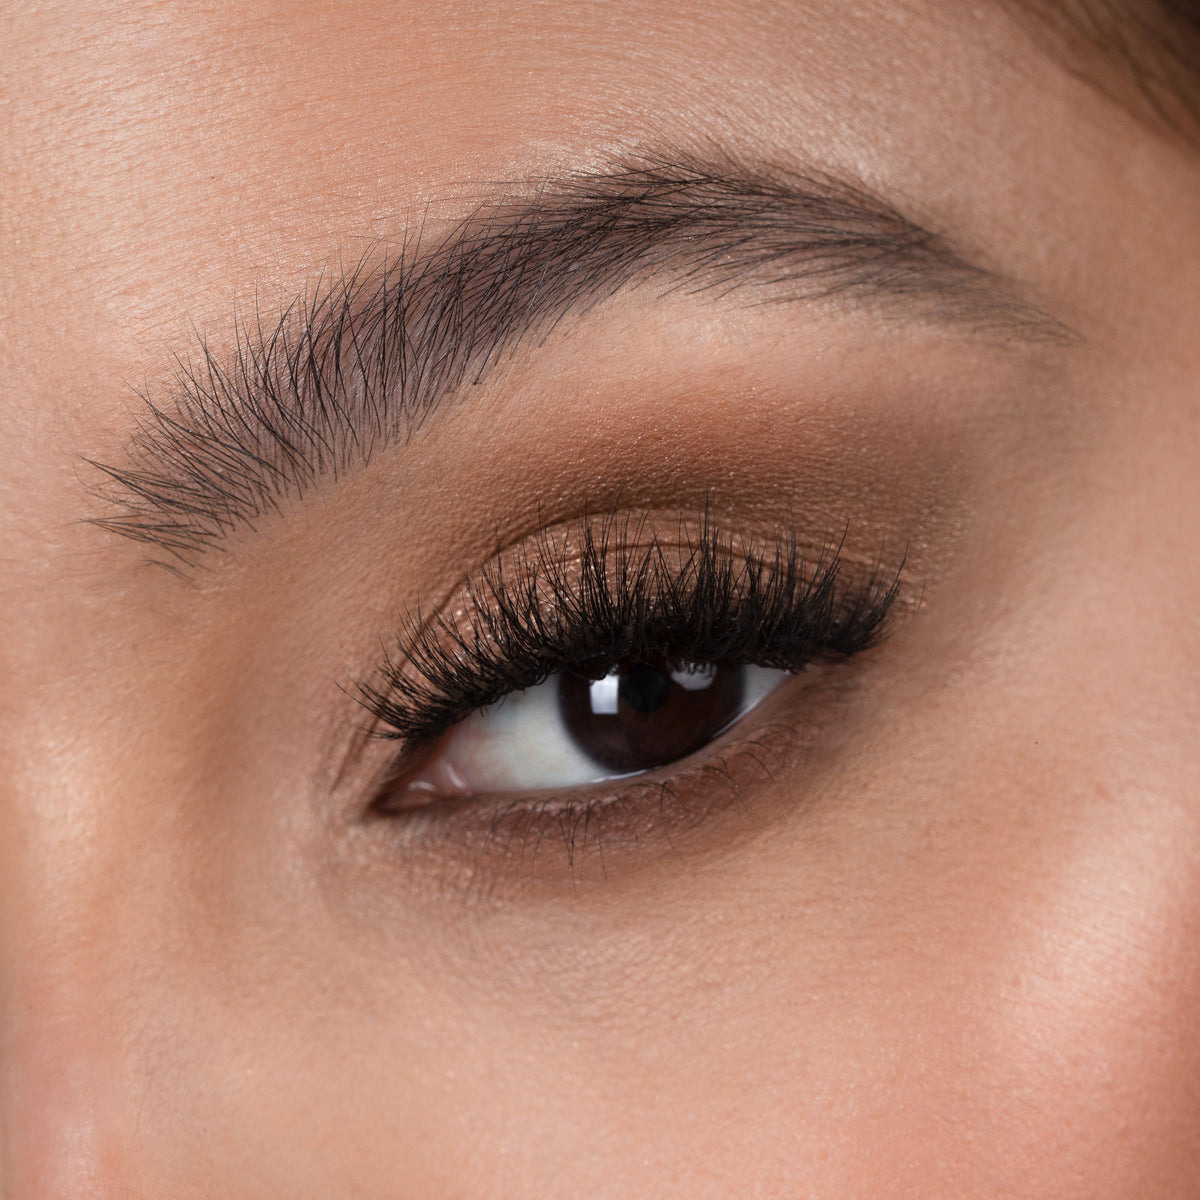 Lithe Lashes Bold Collection Style B6 - Prim & Pleated, a close up eye thumbnail image of the model's eye wearing the false lashes for an up close perspective on how elegant the falsies look on the eye.